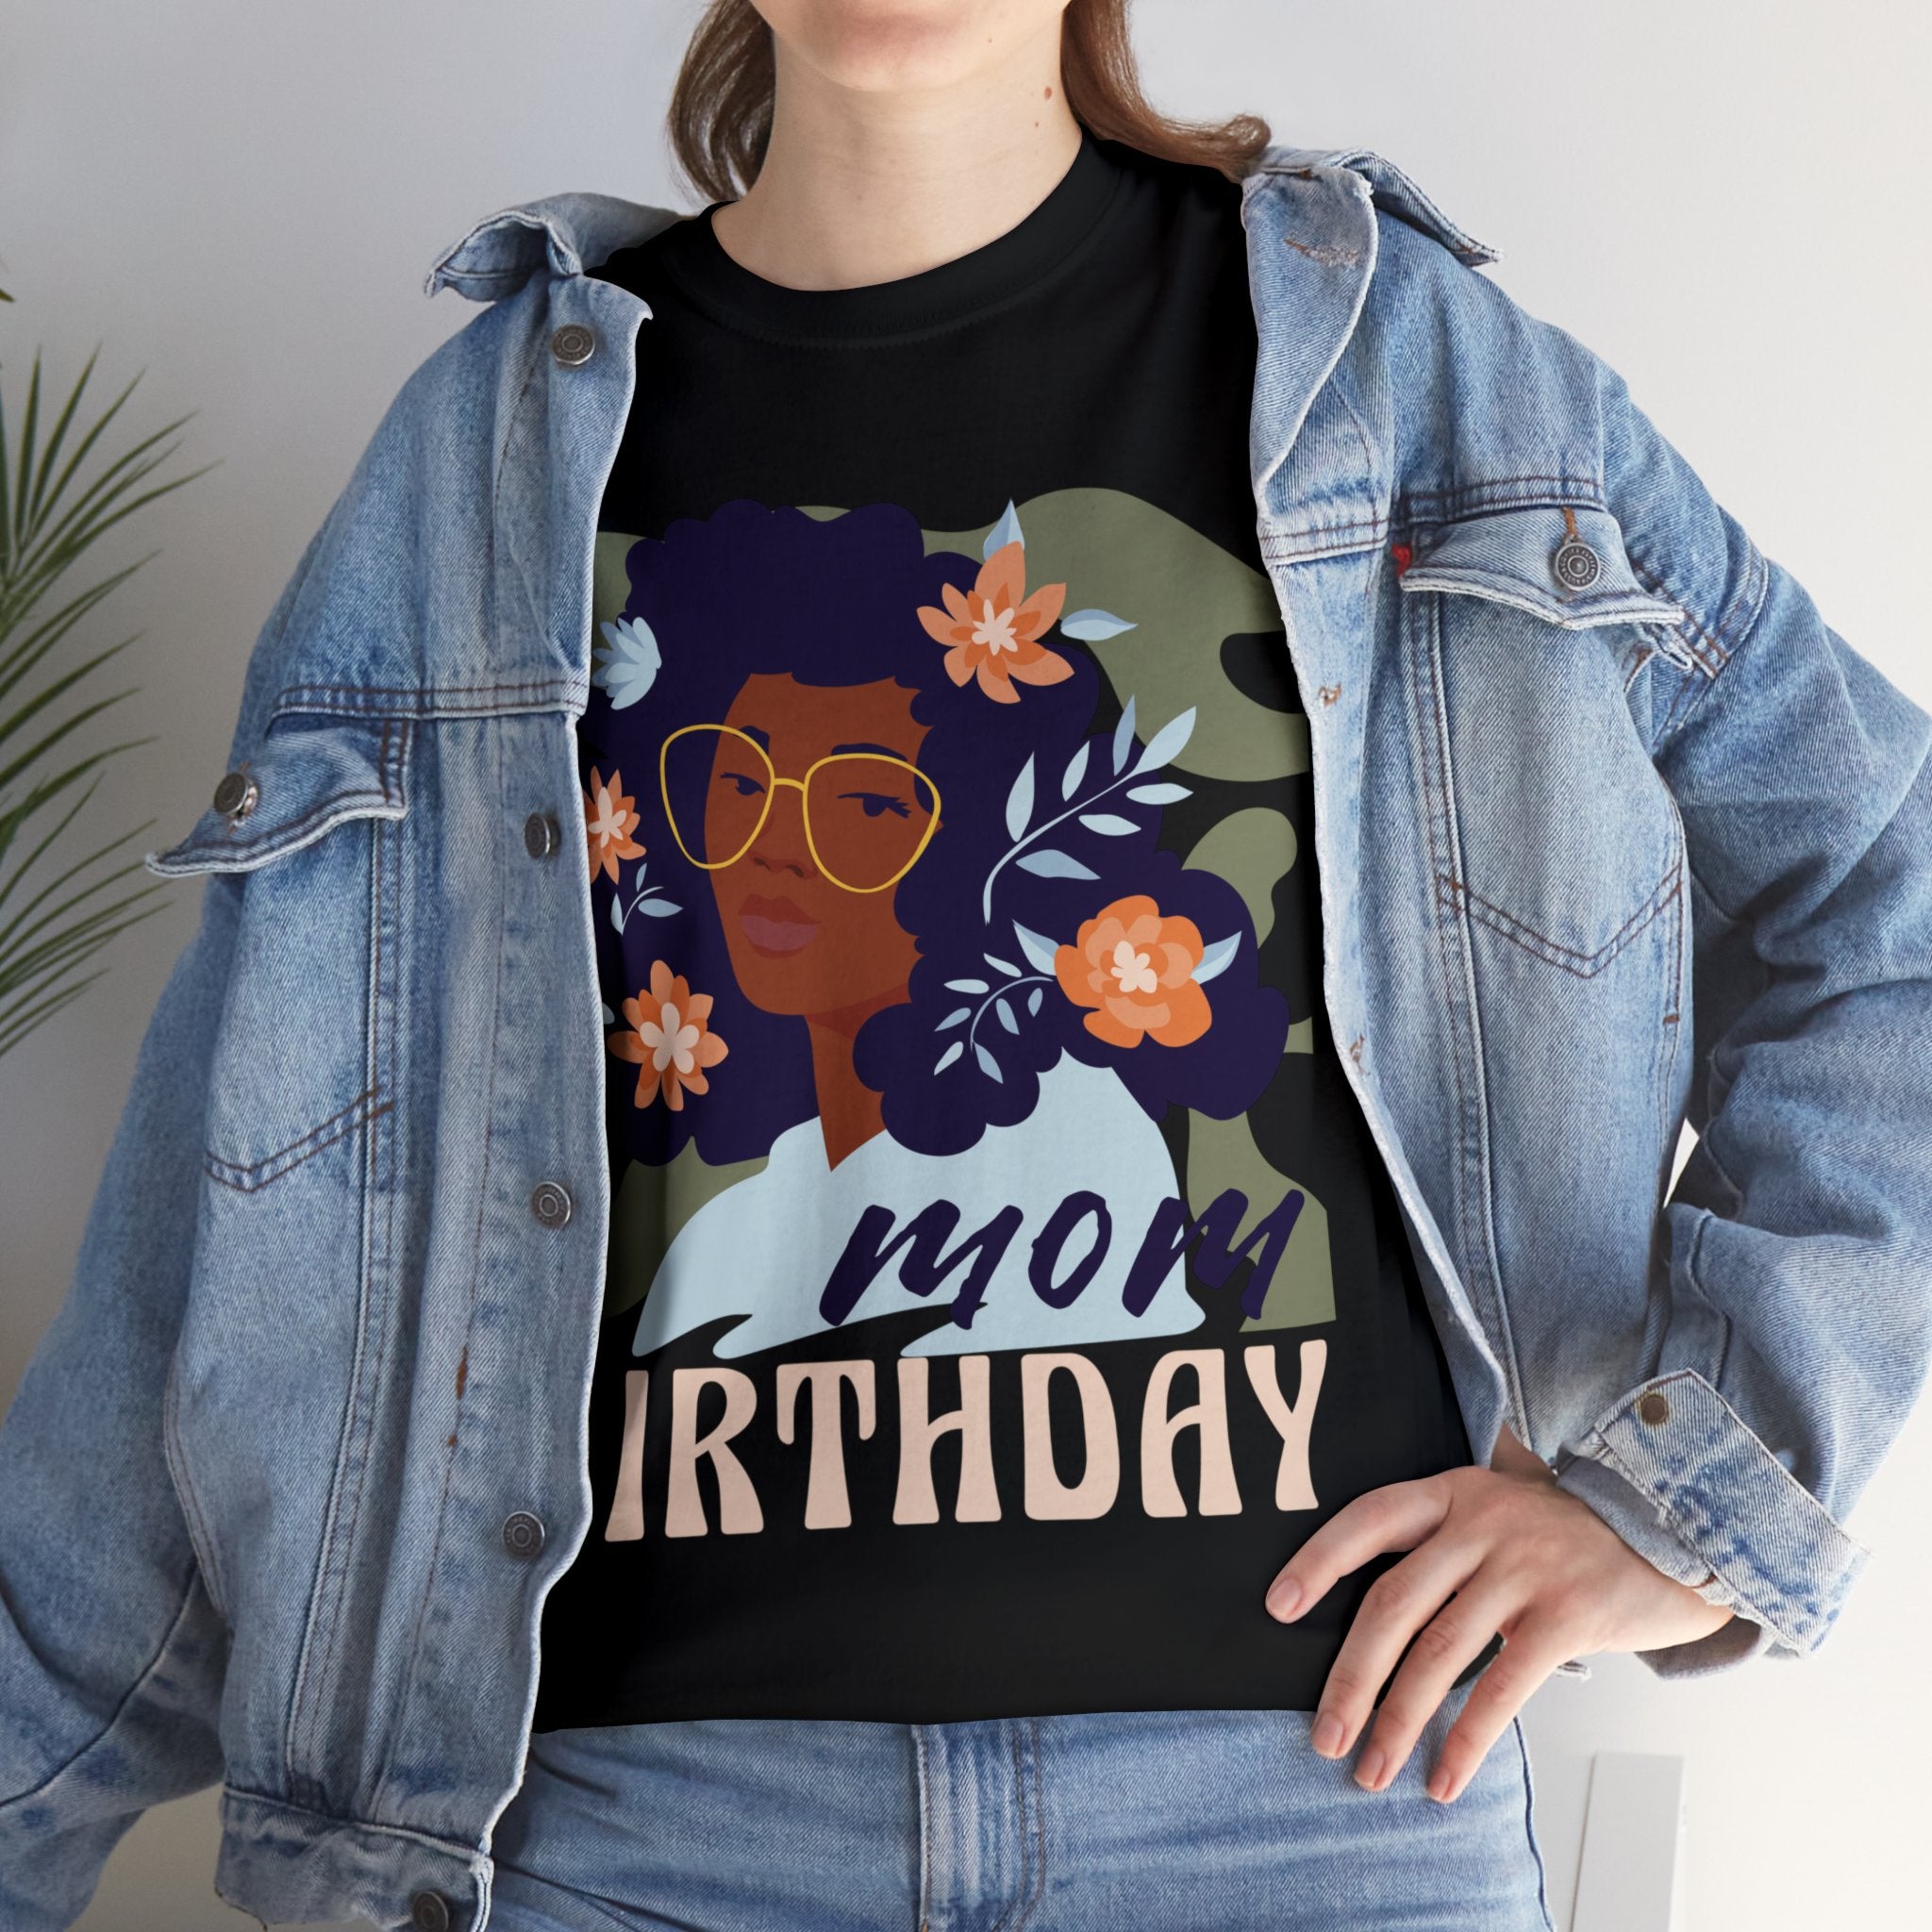 Dentist wish you Happy Birthday Mom with flowers and glasses T-Shirt